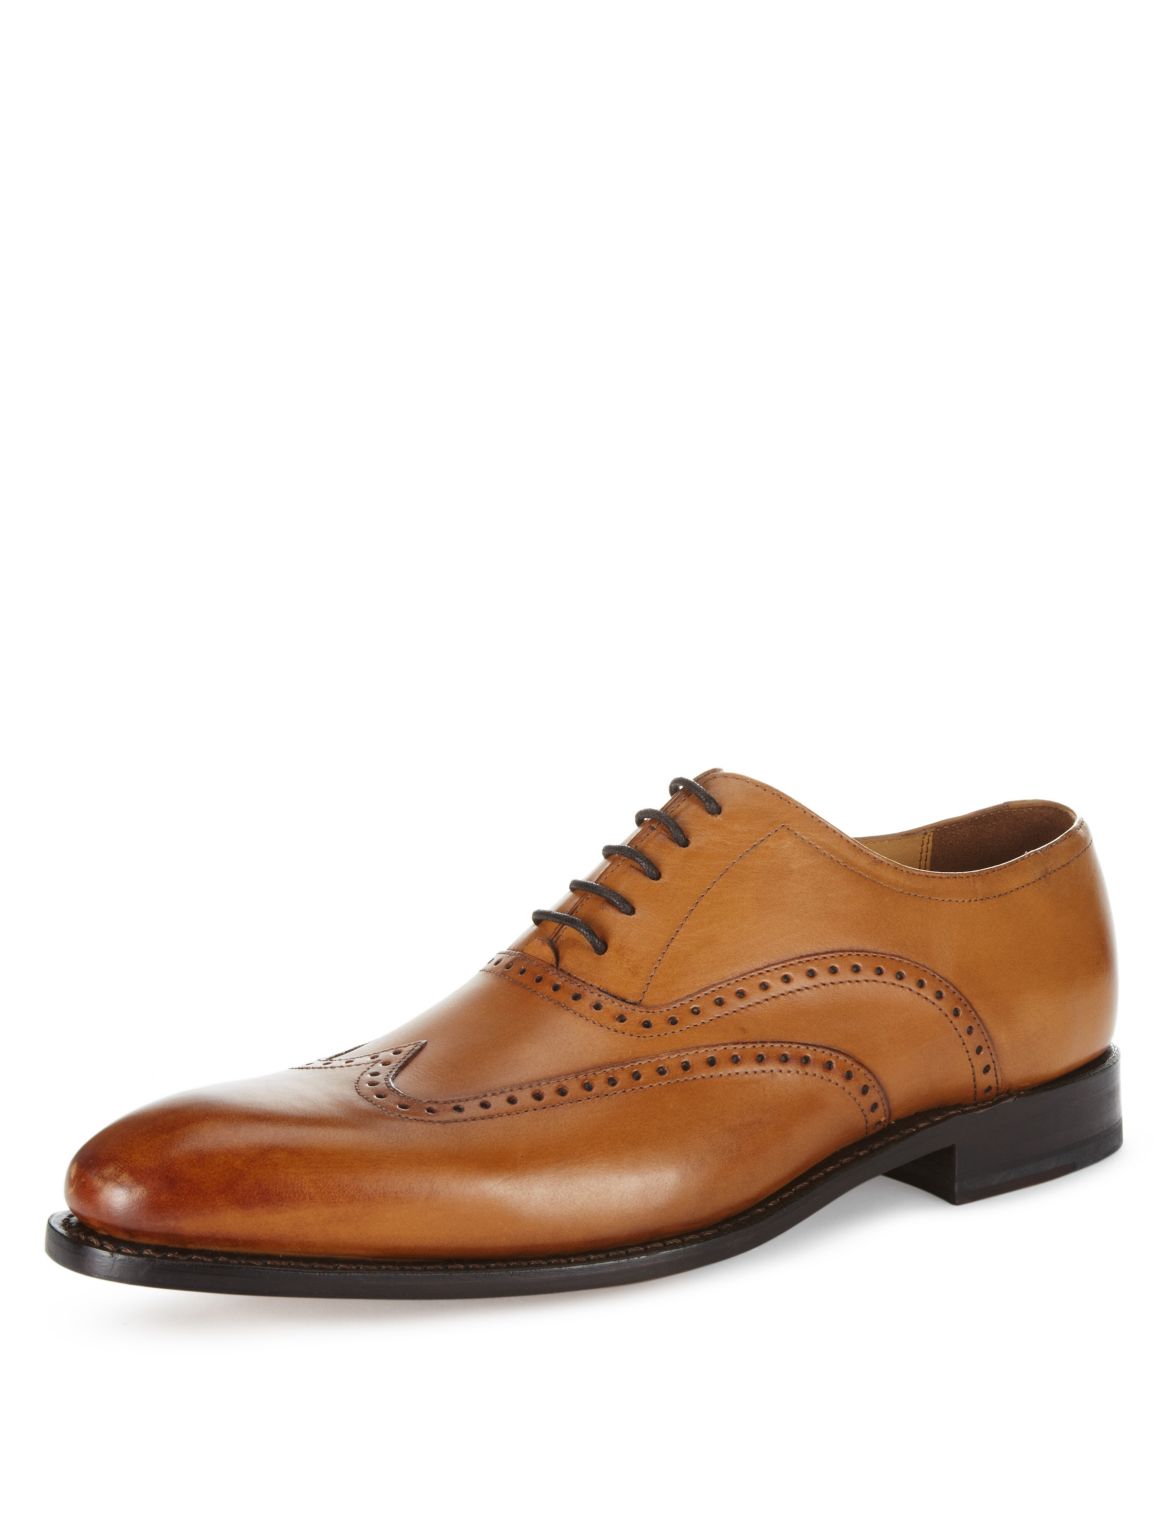 Leather Welted Lace Up Brogue Shoes Tan | Devcube